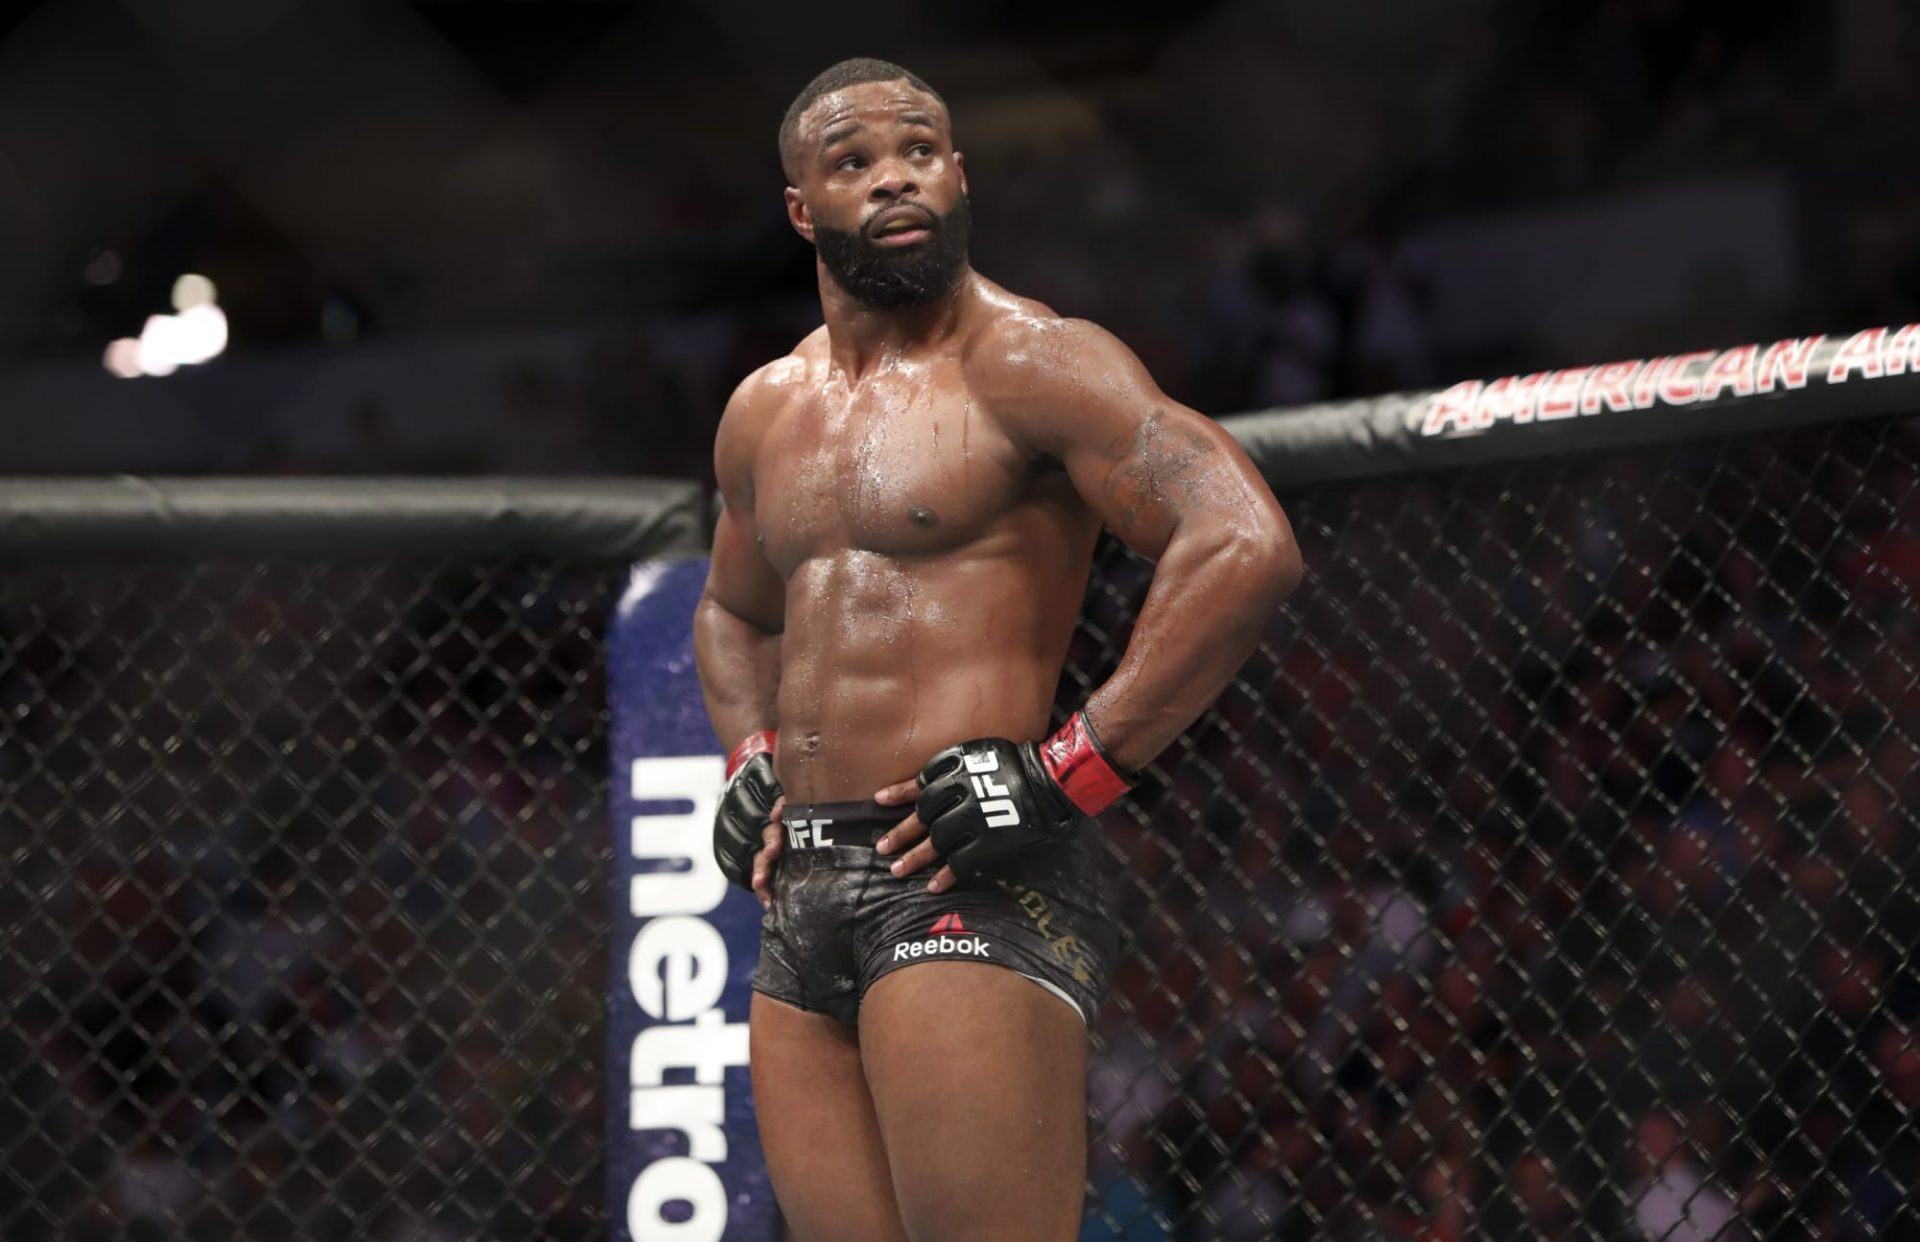 Tyron Woodley highlights: 3 of presumably the most curious moments of his career